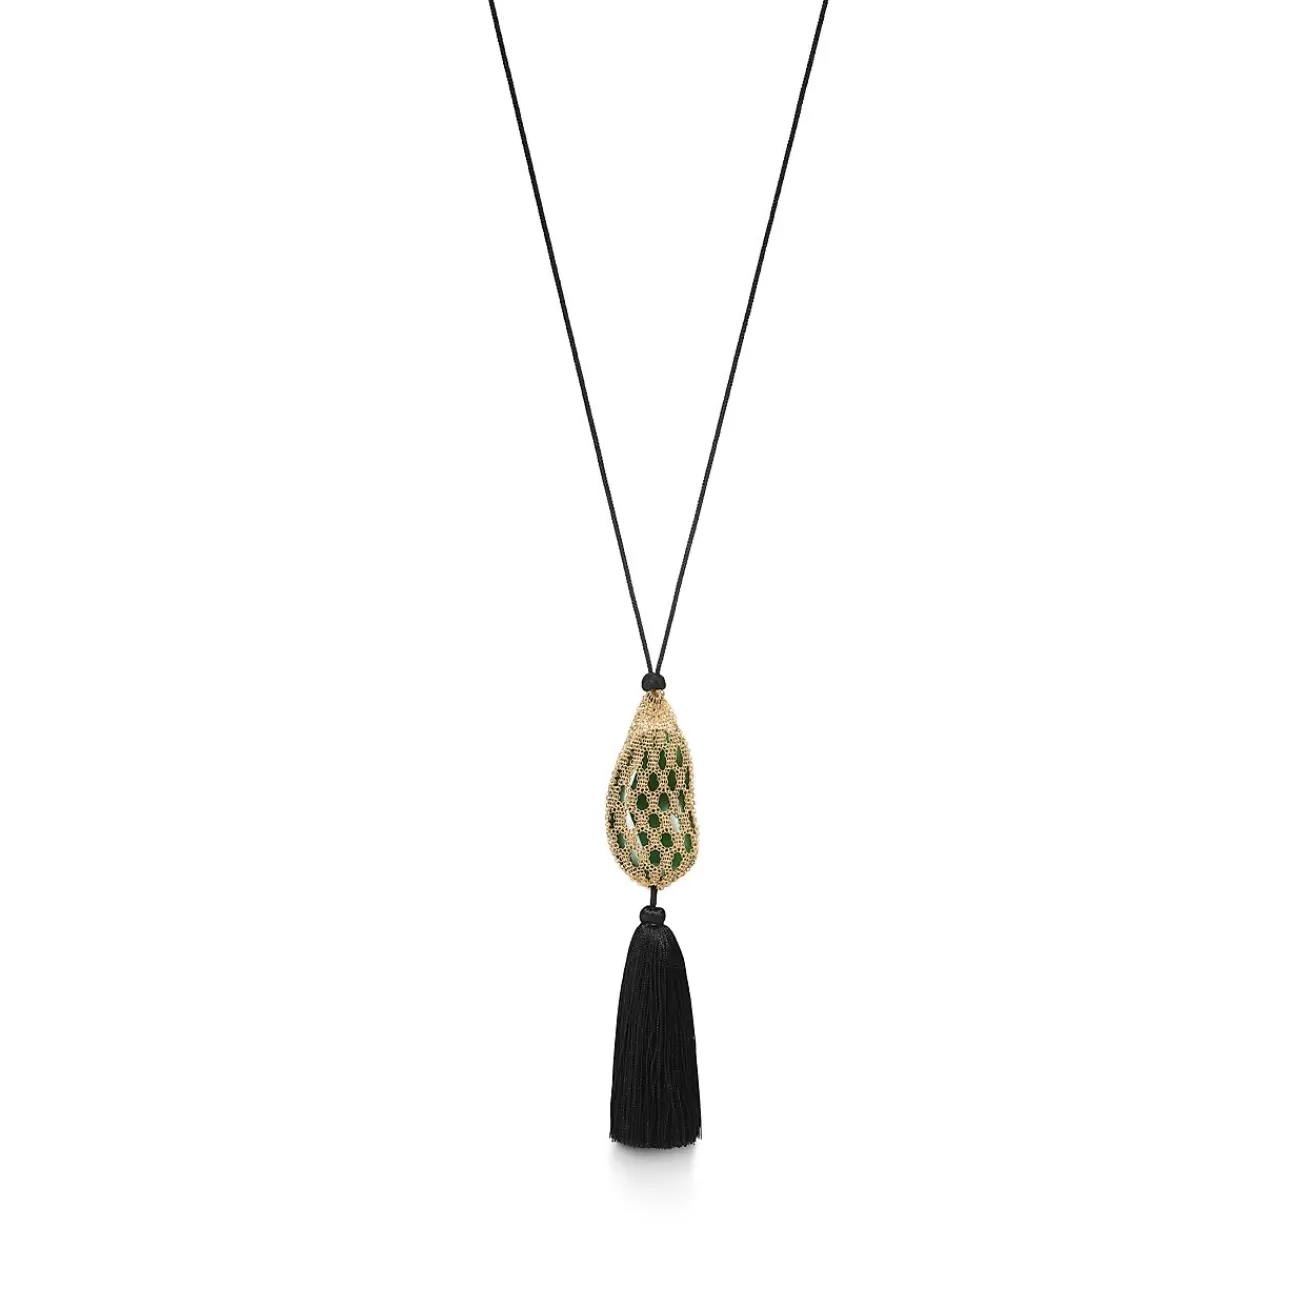 Tiffany & Co. Elsa Peretti® Bean® design Necklace of Green Jade with Yellow Gold, 29 x 50 mm | ^ Necklaces & Pendants | Gold Jewelry